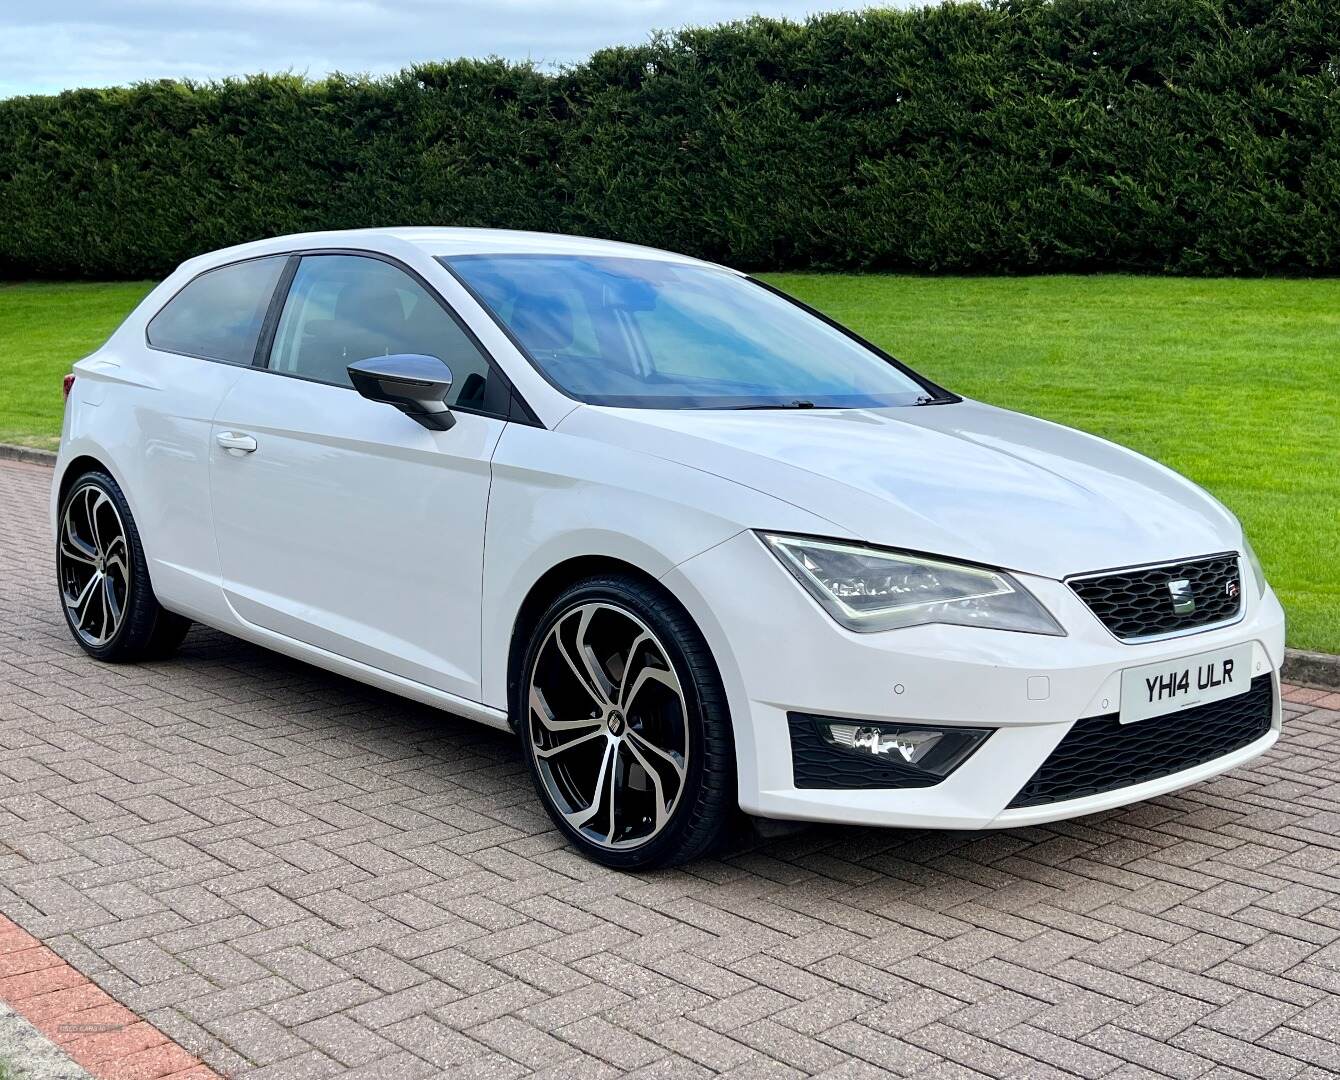 Used 2014 Seat Leon 2.0 TDI 184 FR 3dr [Technology Pack] For Sale